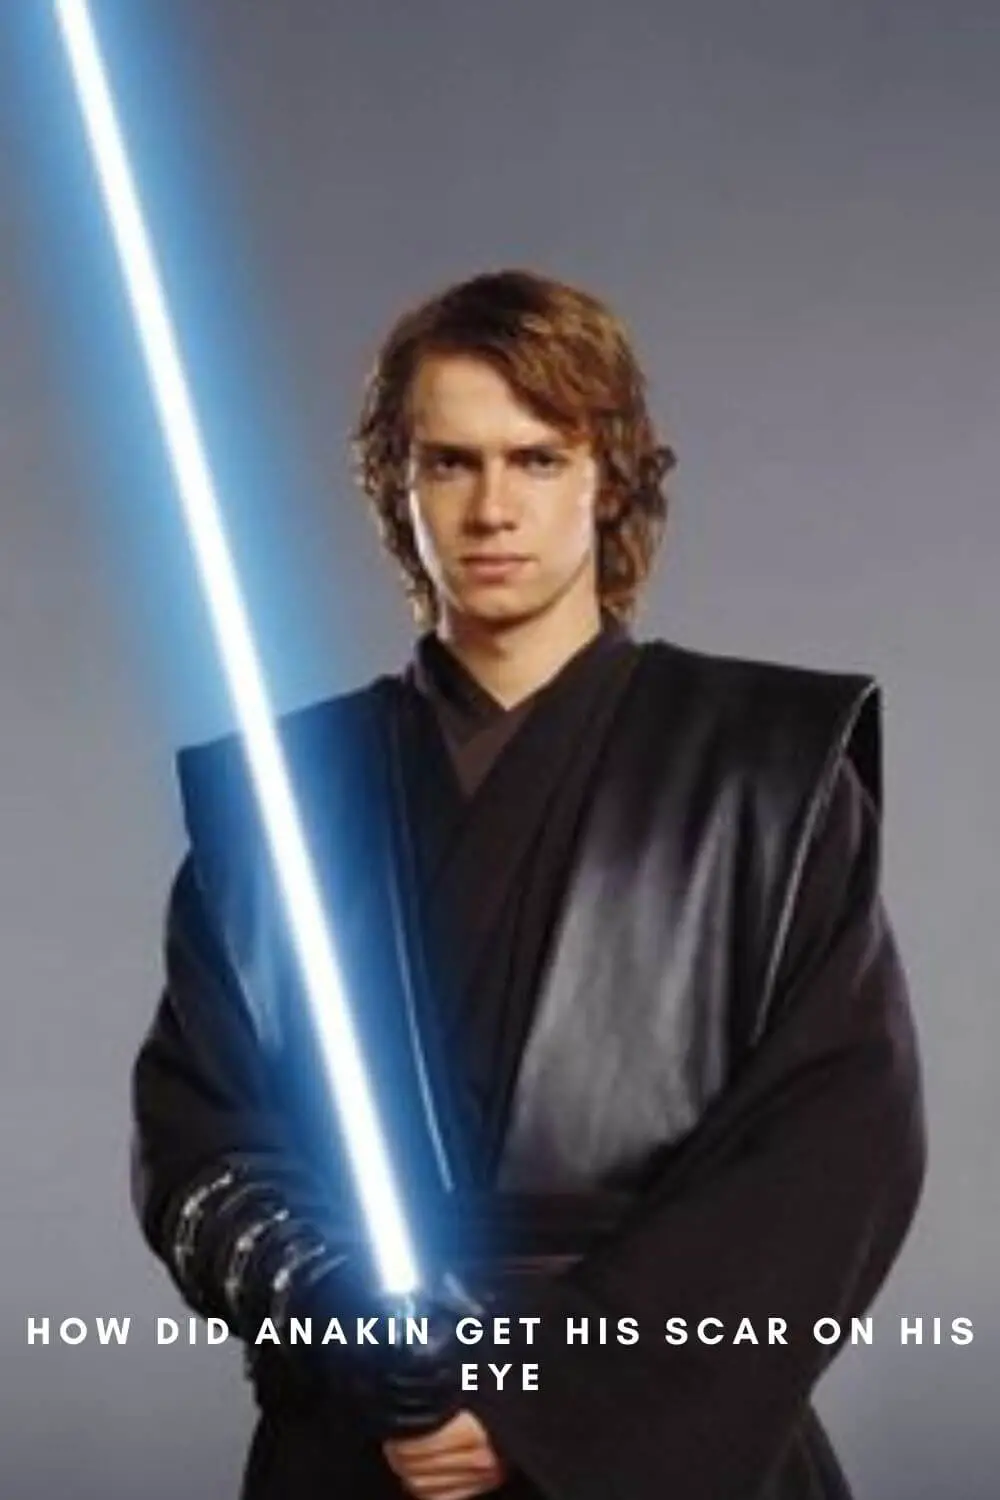 How did Anakin get his Scar on his Eye